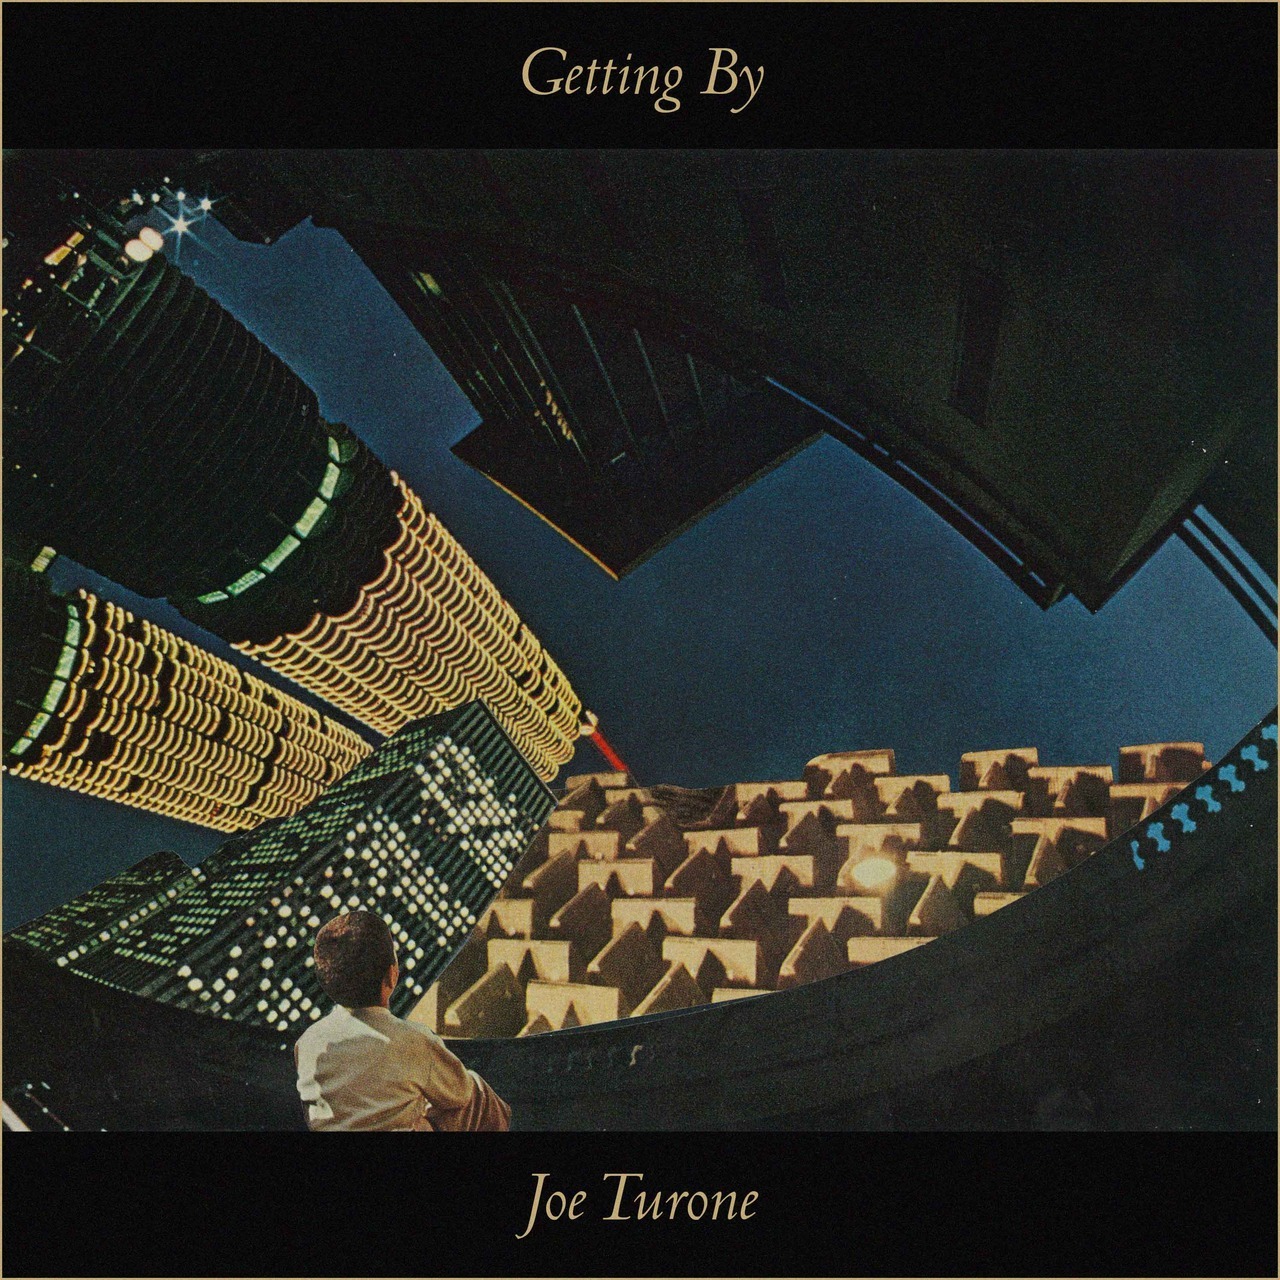 album art for joe turone’s new album “getting by”
preorder and check out new songs here